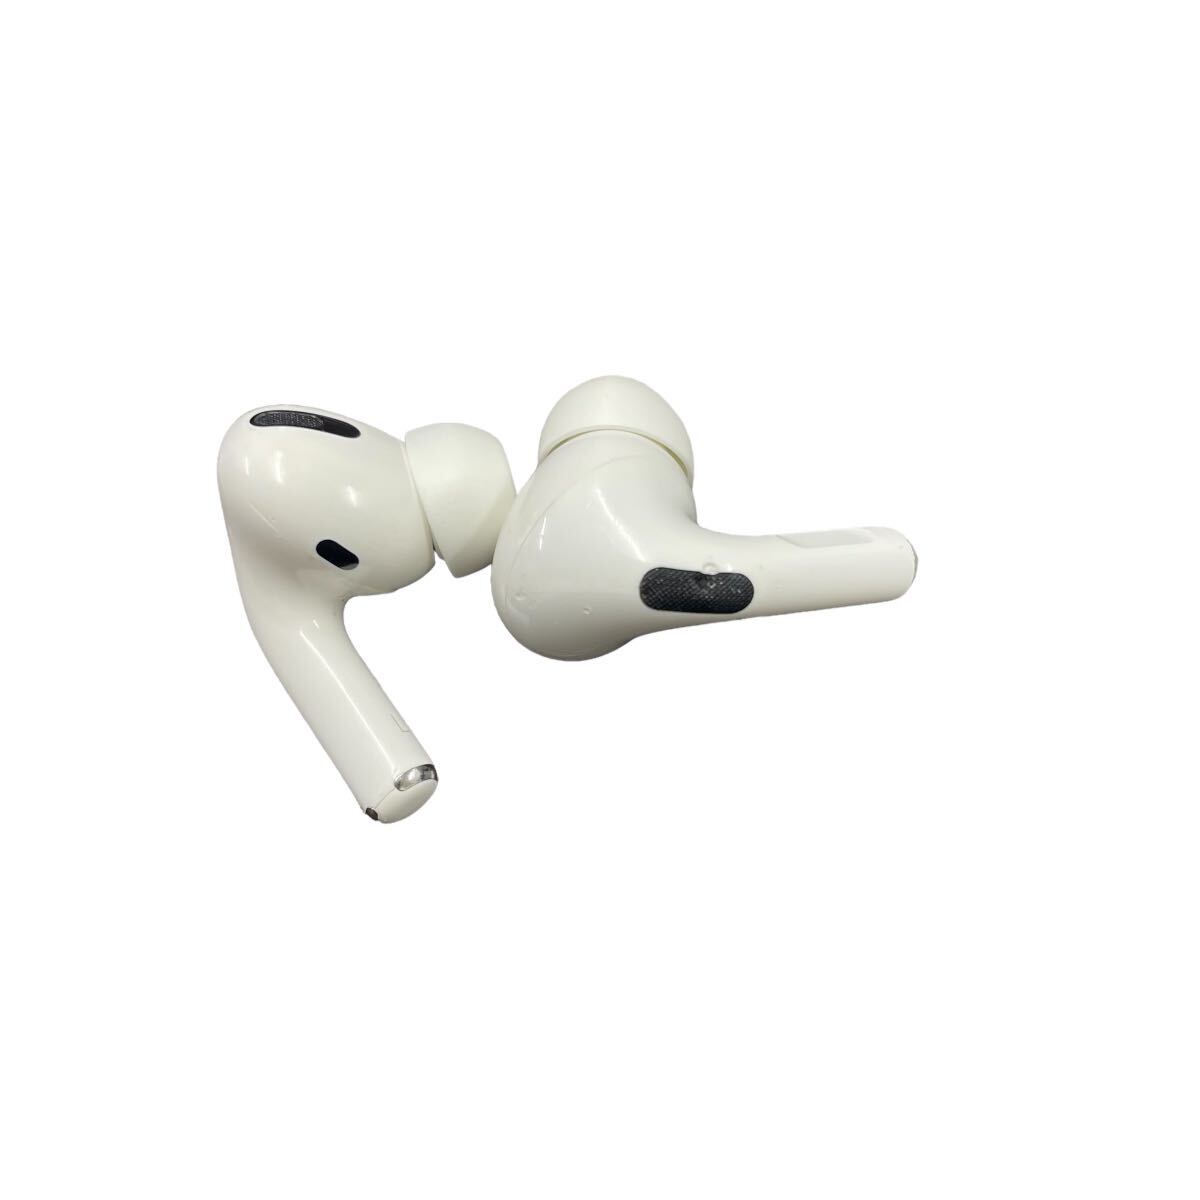 AirPods Pro MWP22J/A Apple純正エアポッズプロ 第一世代 ワイヤレス 